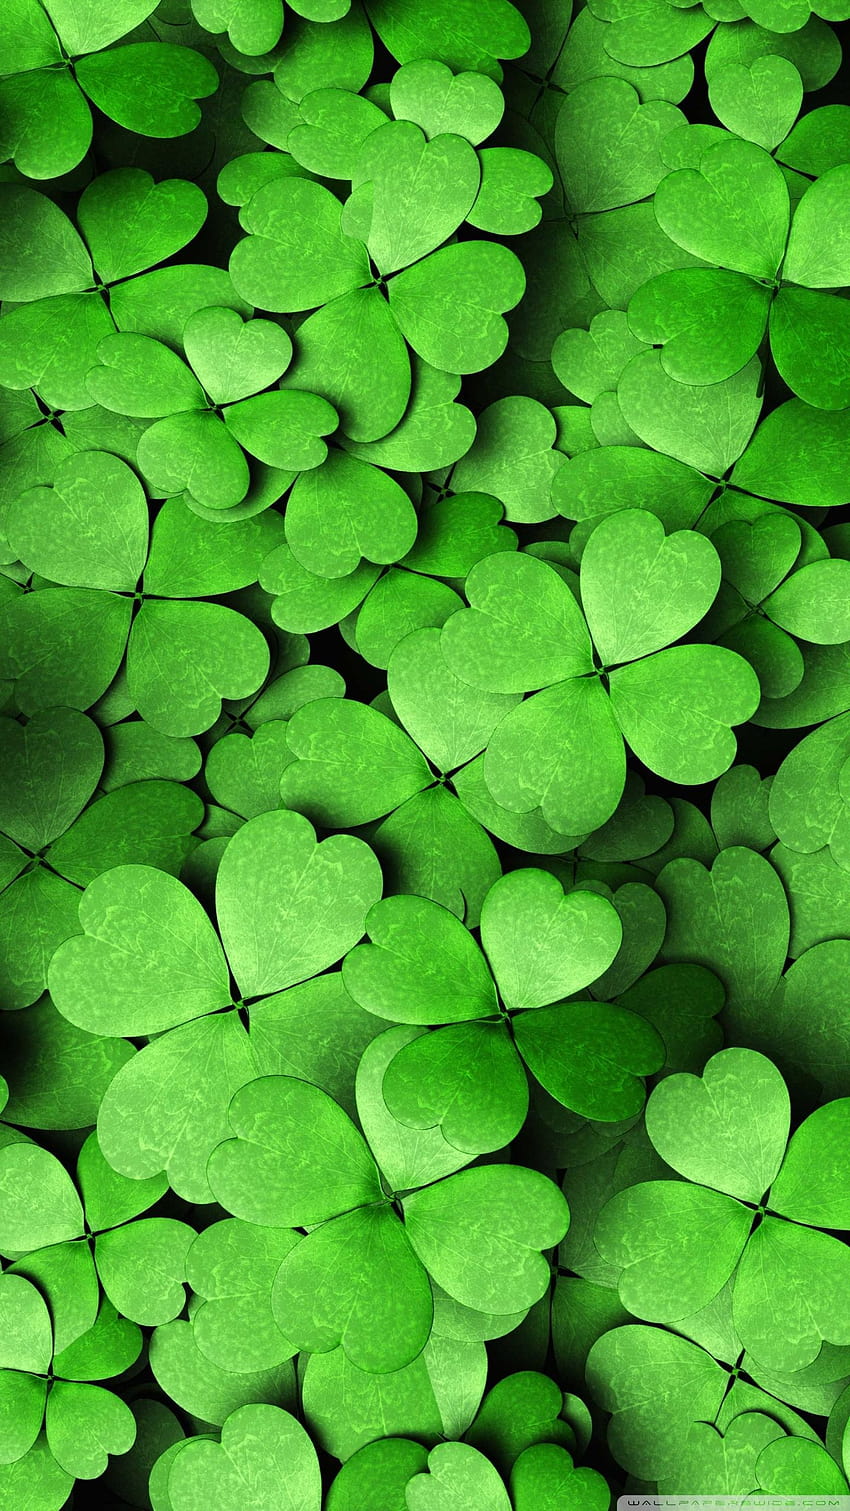 Four Leaf Clover, android 4 leaves clover HD phone wallpaper